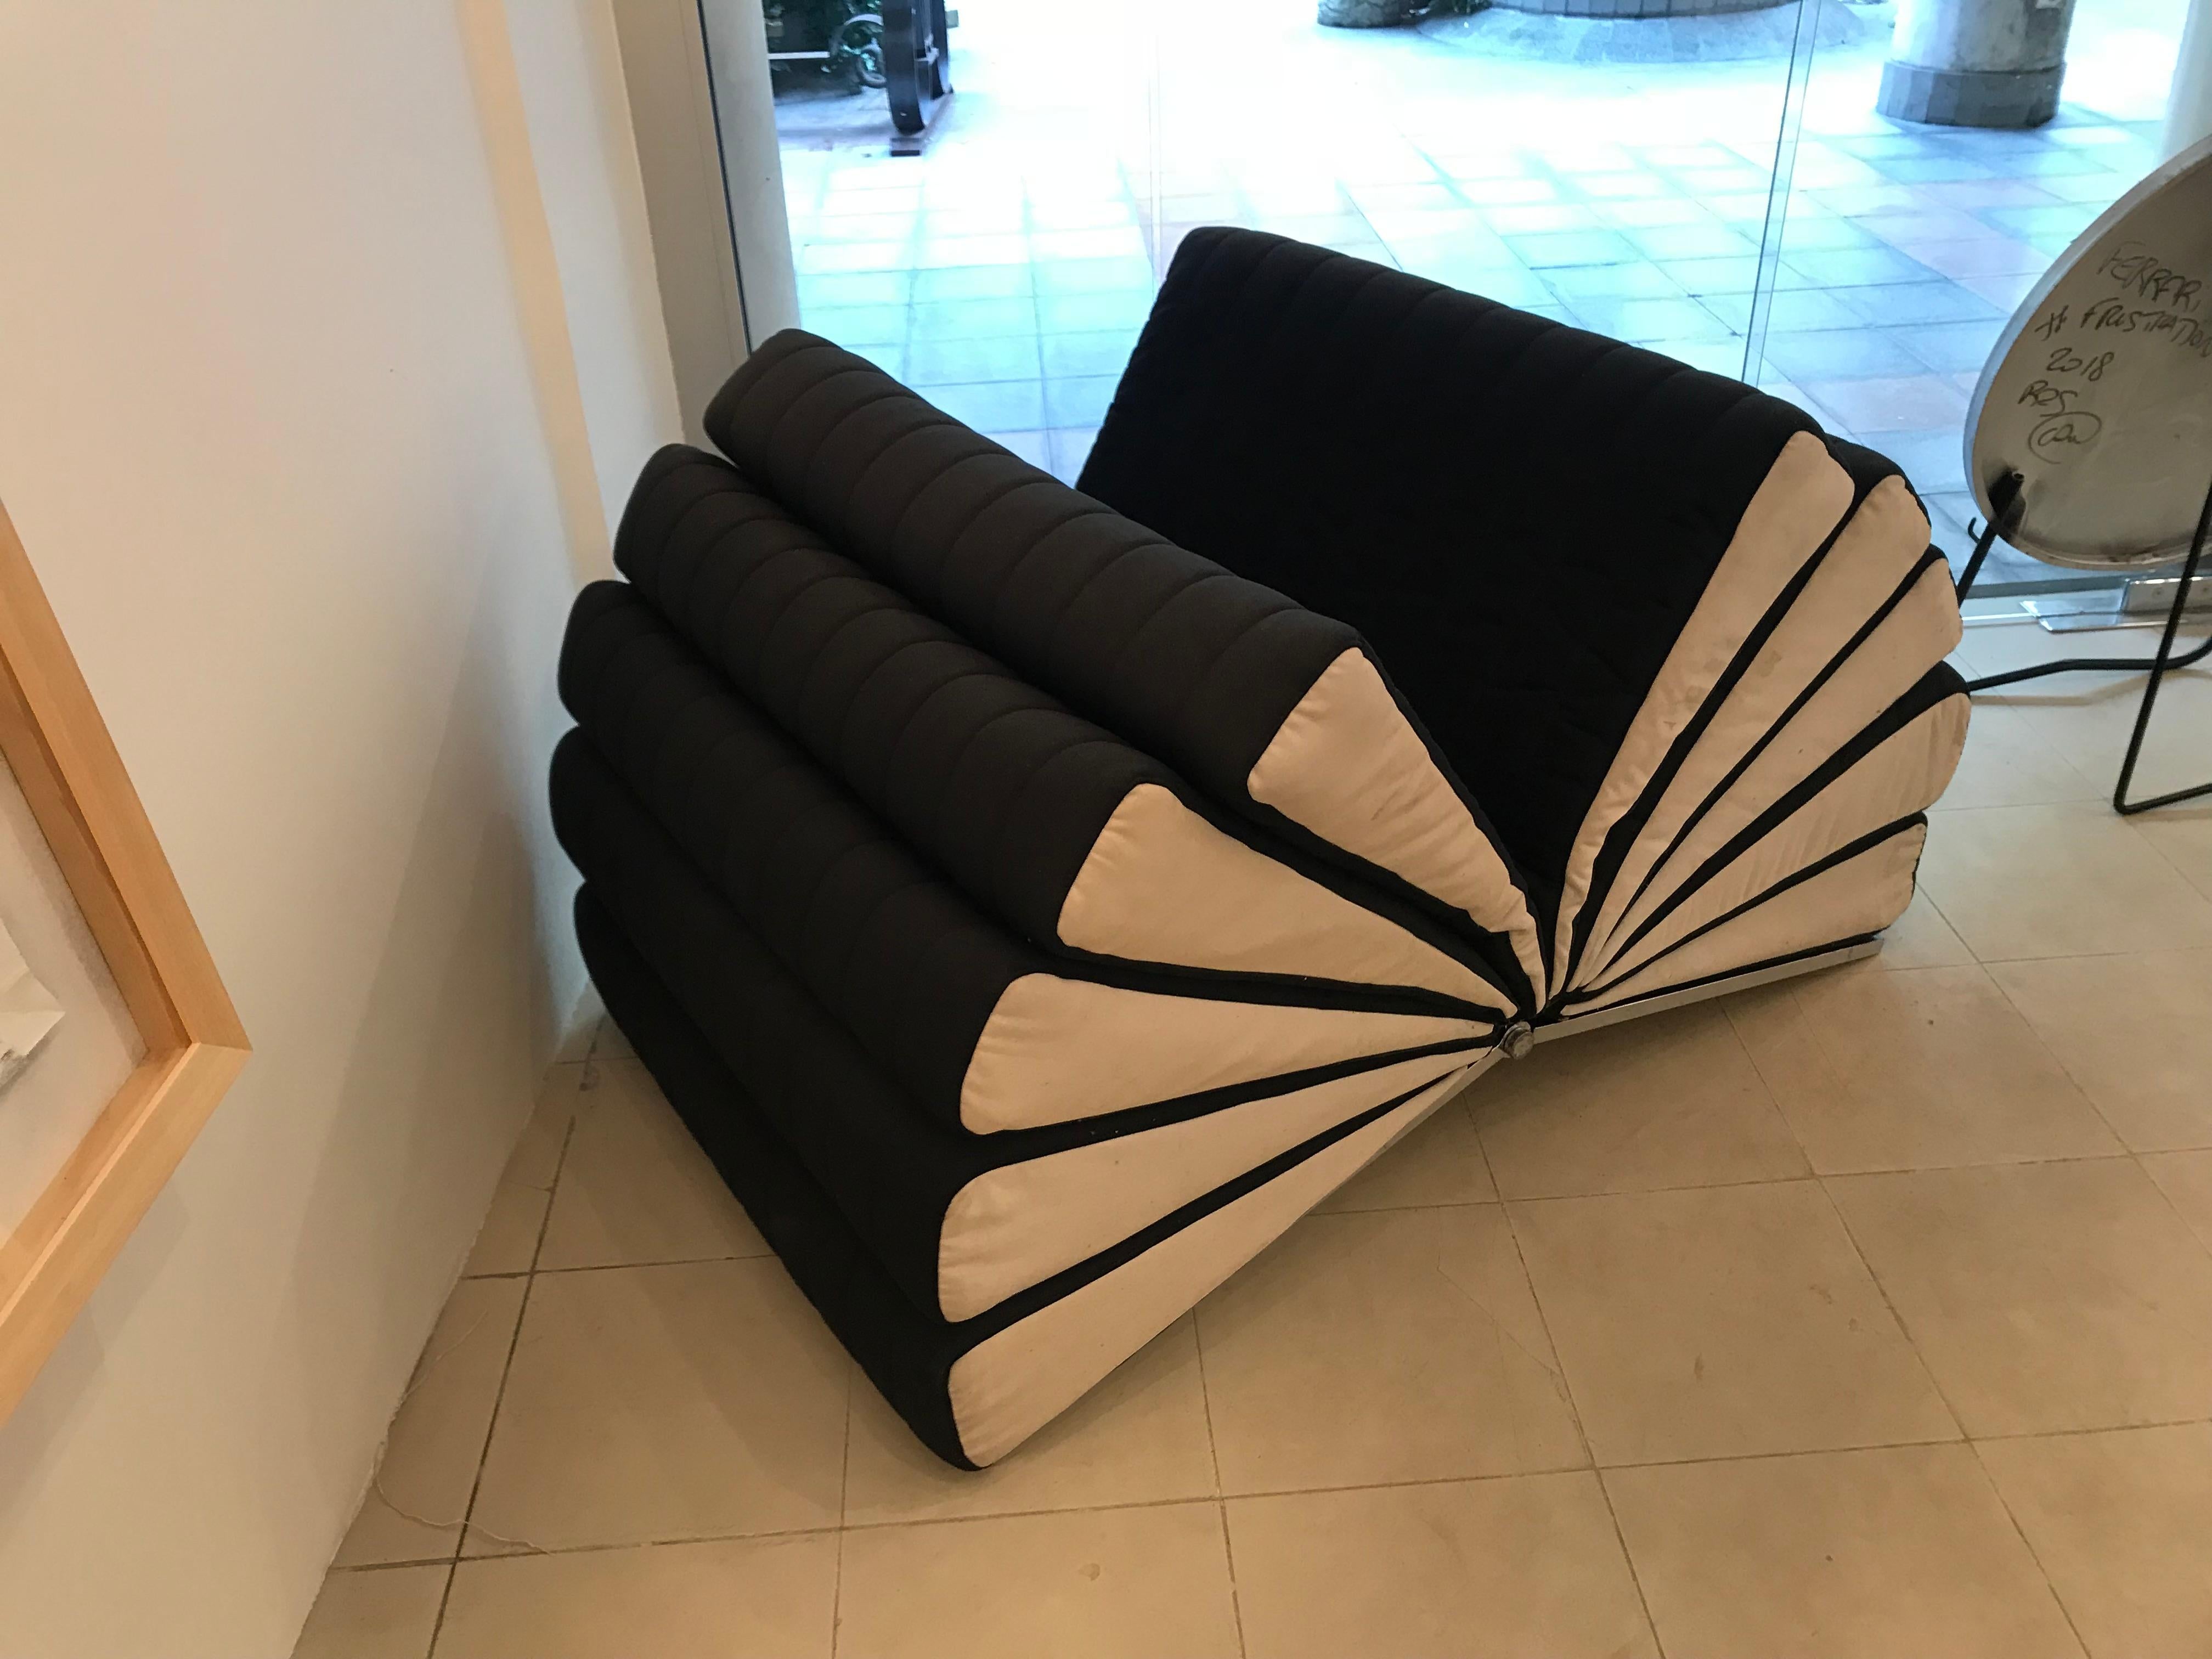 Exceptional and extremely rare Libro armchair
White and black fabric
Design Gianni Pareschi
Busnelli Edition, 
circa 1970
Measures: H 90 / p 128 / l 82
5900 euros each
2 available.